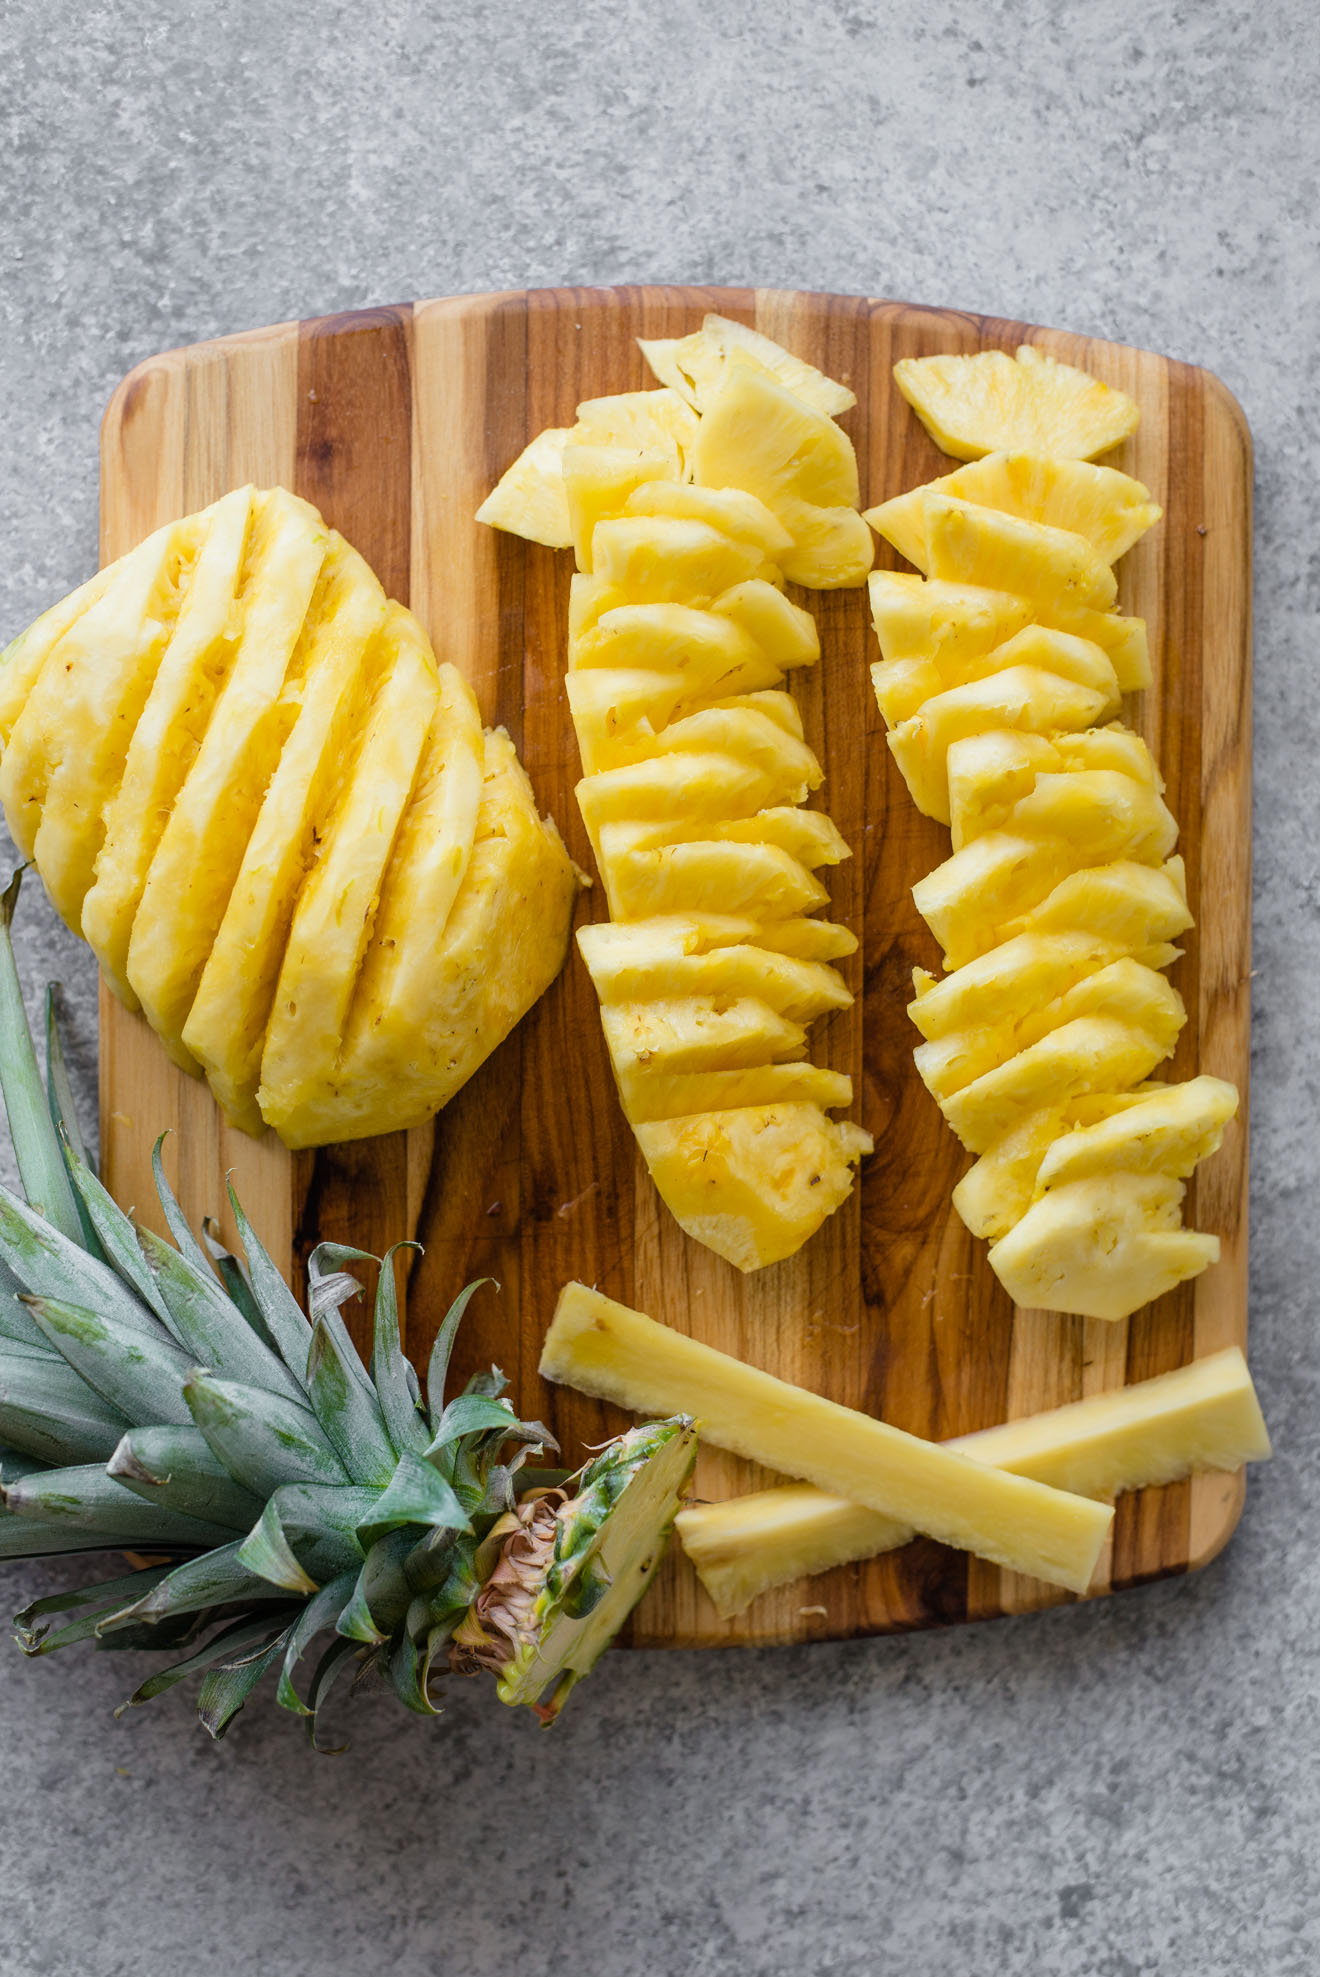 How to Cut a Pineapple | Healthy Nibbles & Bits